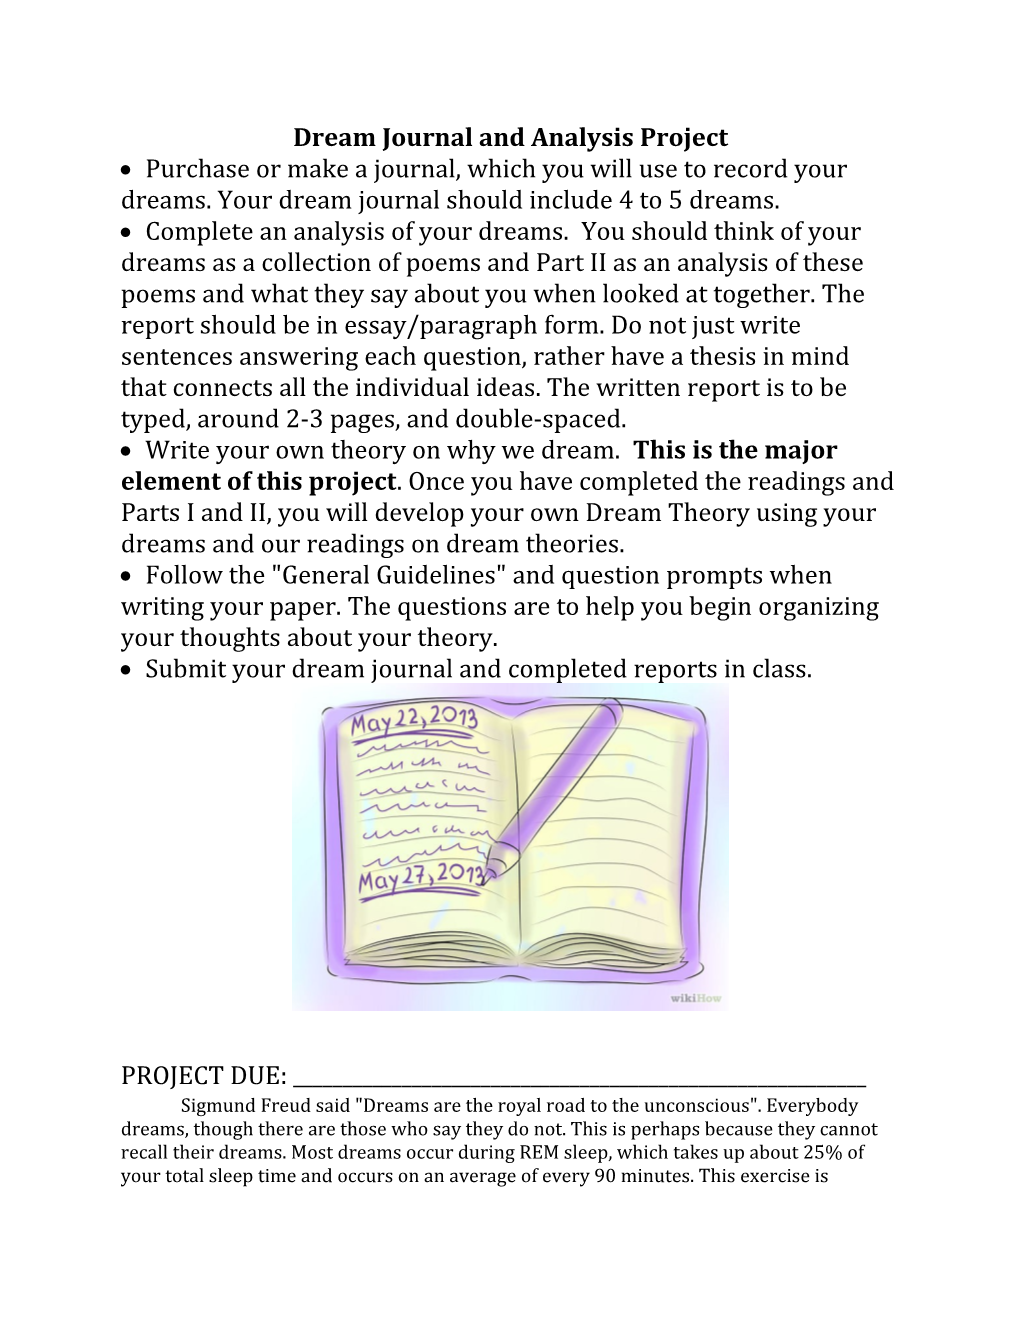 Dream Journal and Analysis Project